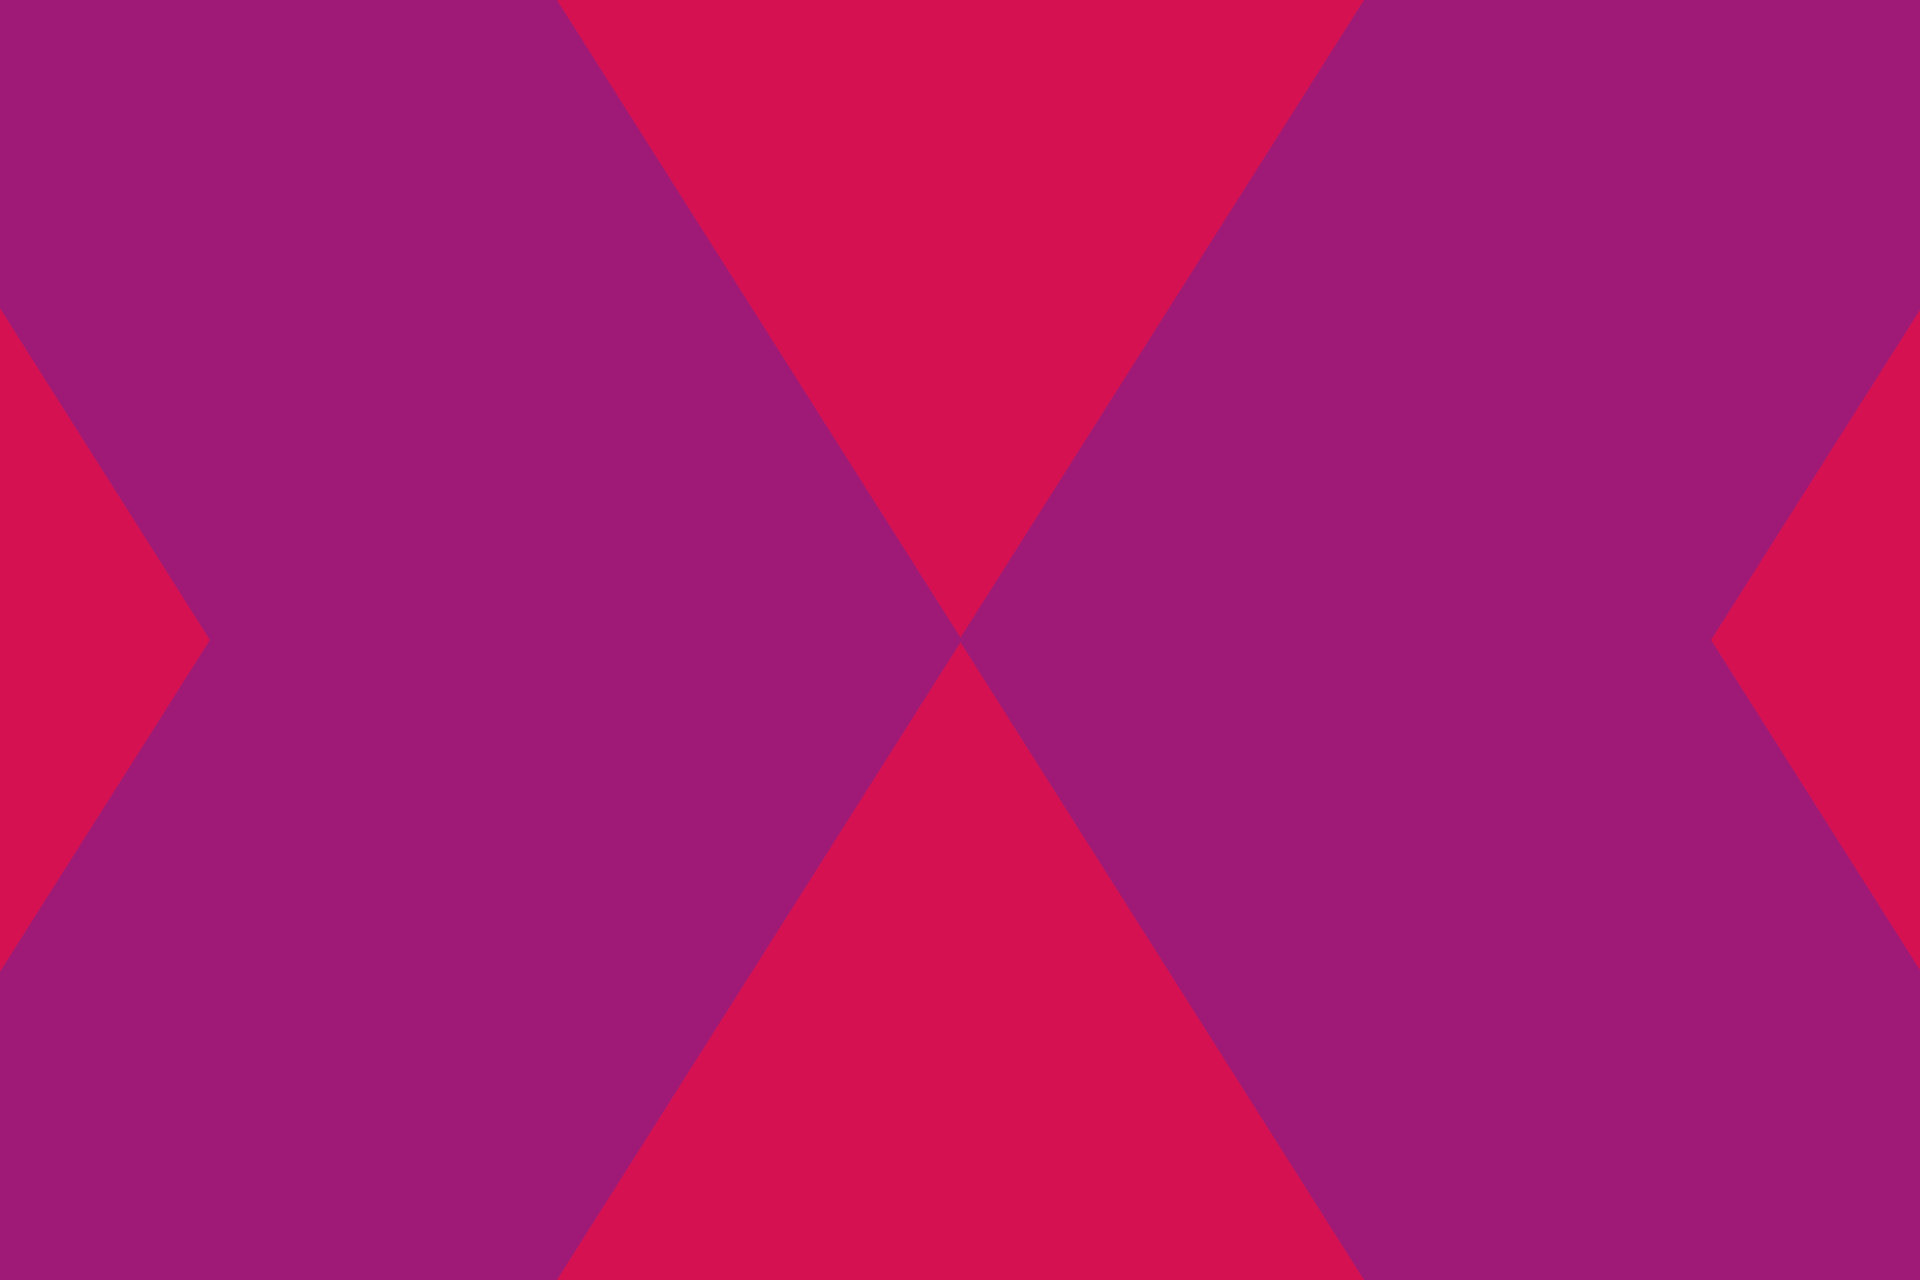 Red background with two purple chevrons on top.